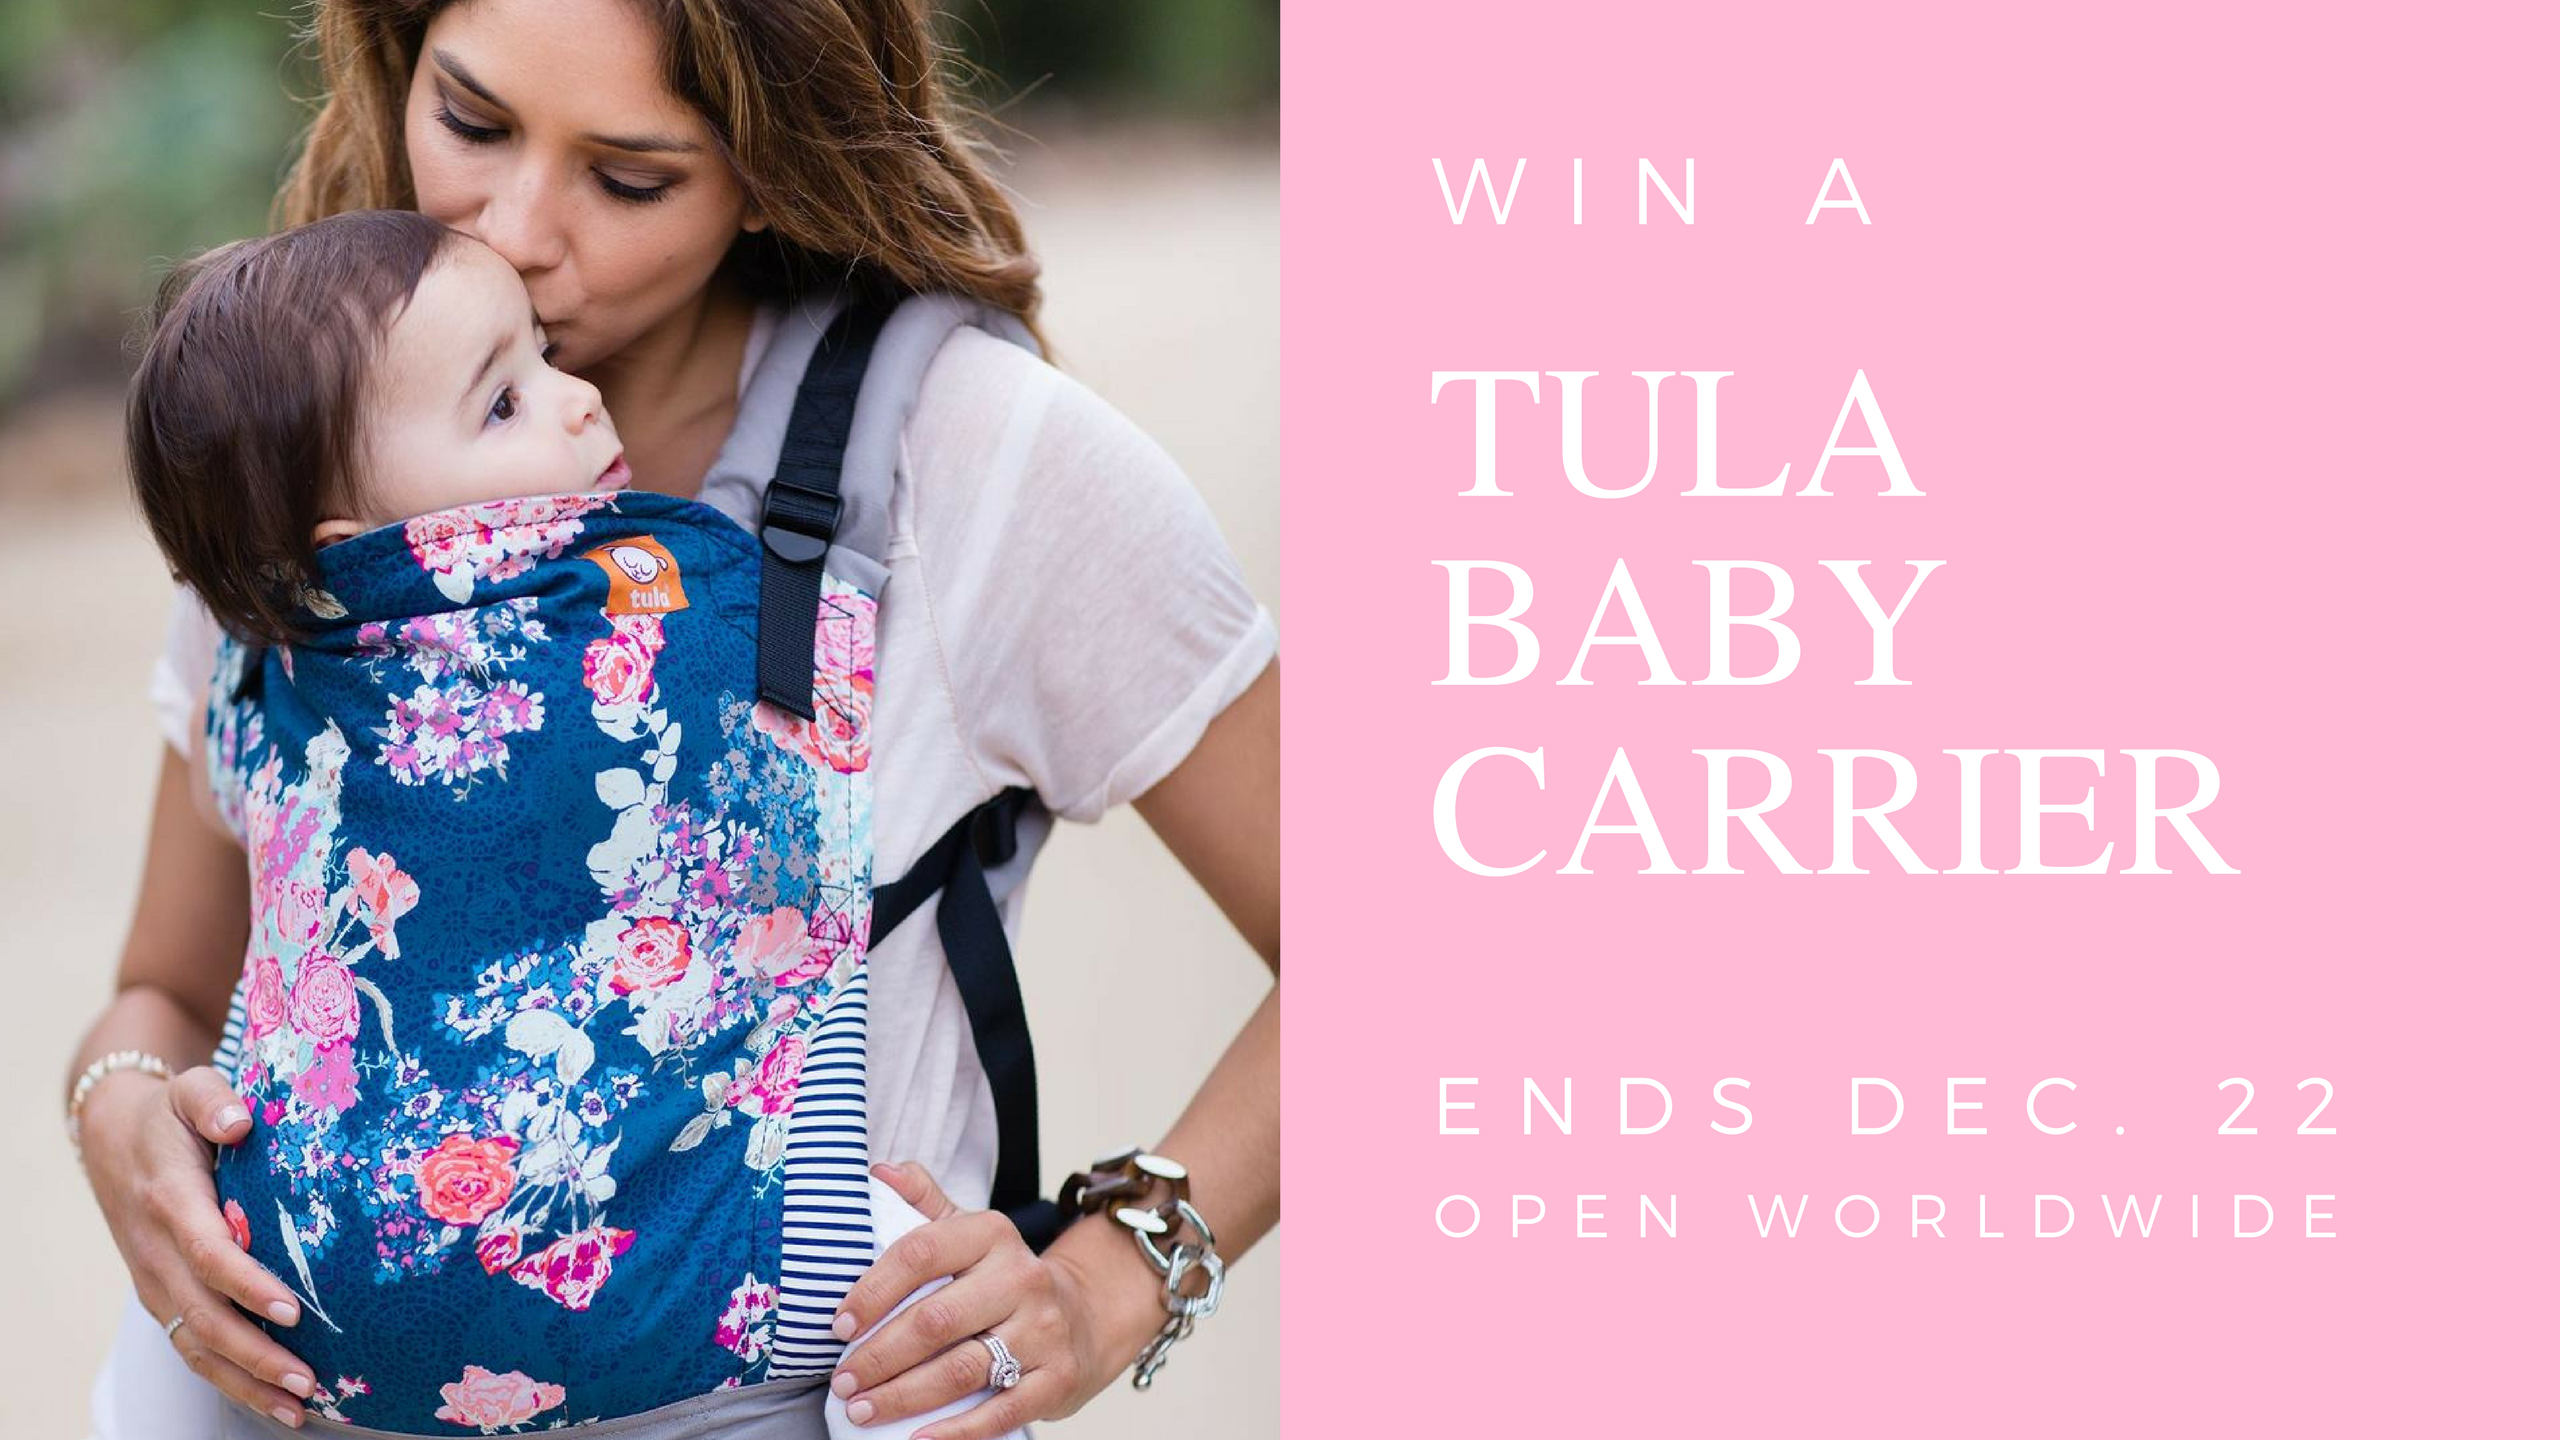 Enter to win a Tula Baby Carrier in style and pattern of choice. Retail value of $170! Baby Tula's high-quality, stylish 'Cloudy' baby carrier is easy-to-use and provides an ergonomically safe and comfortable carry for baby and caregiver.